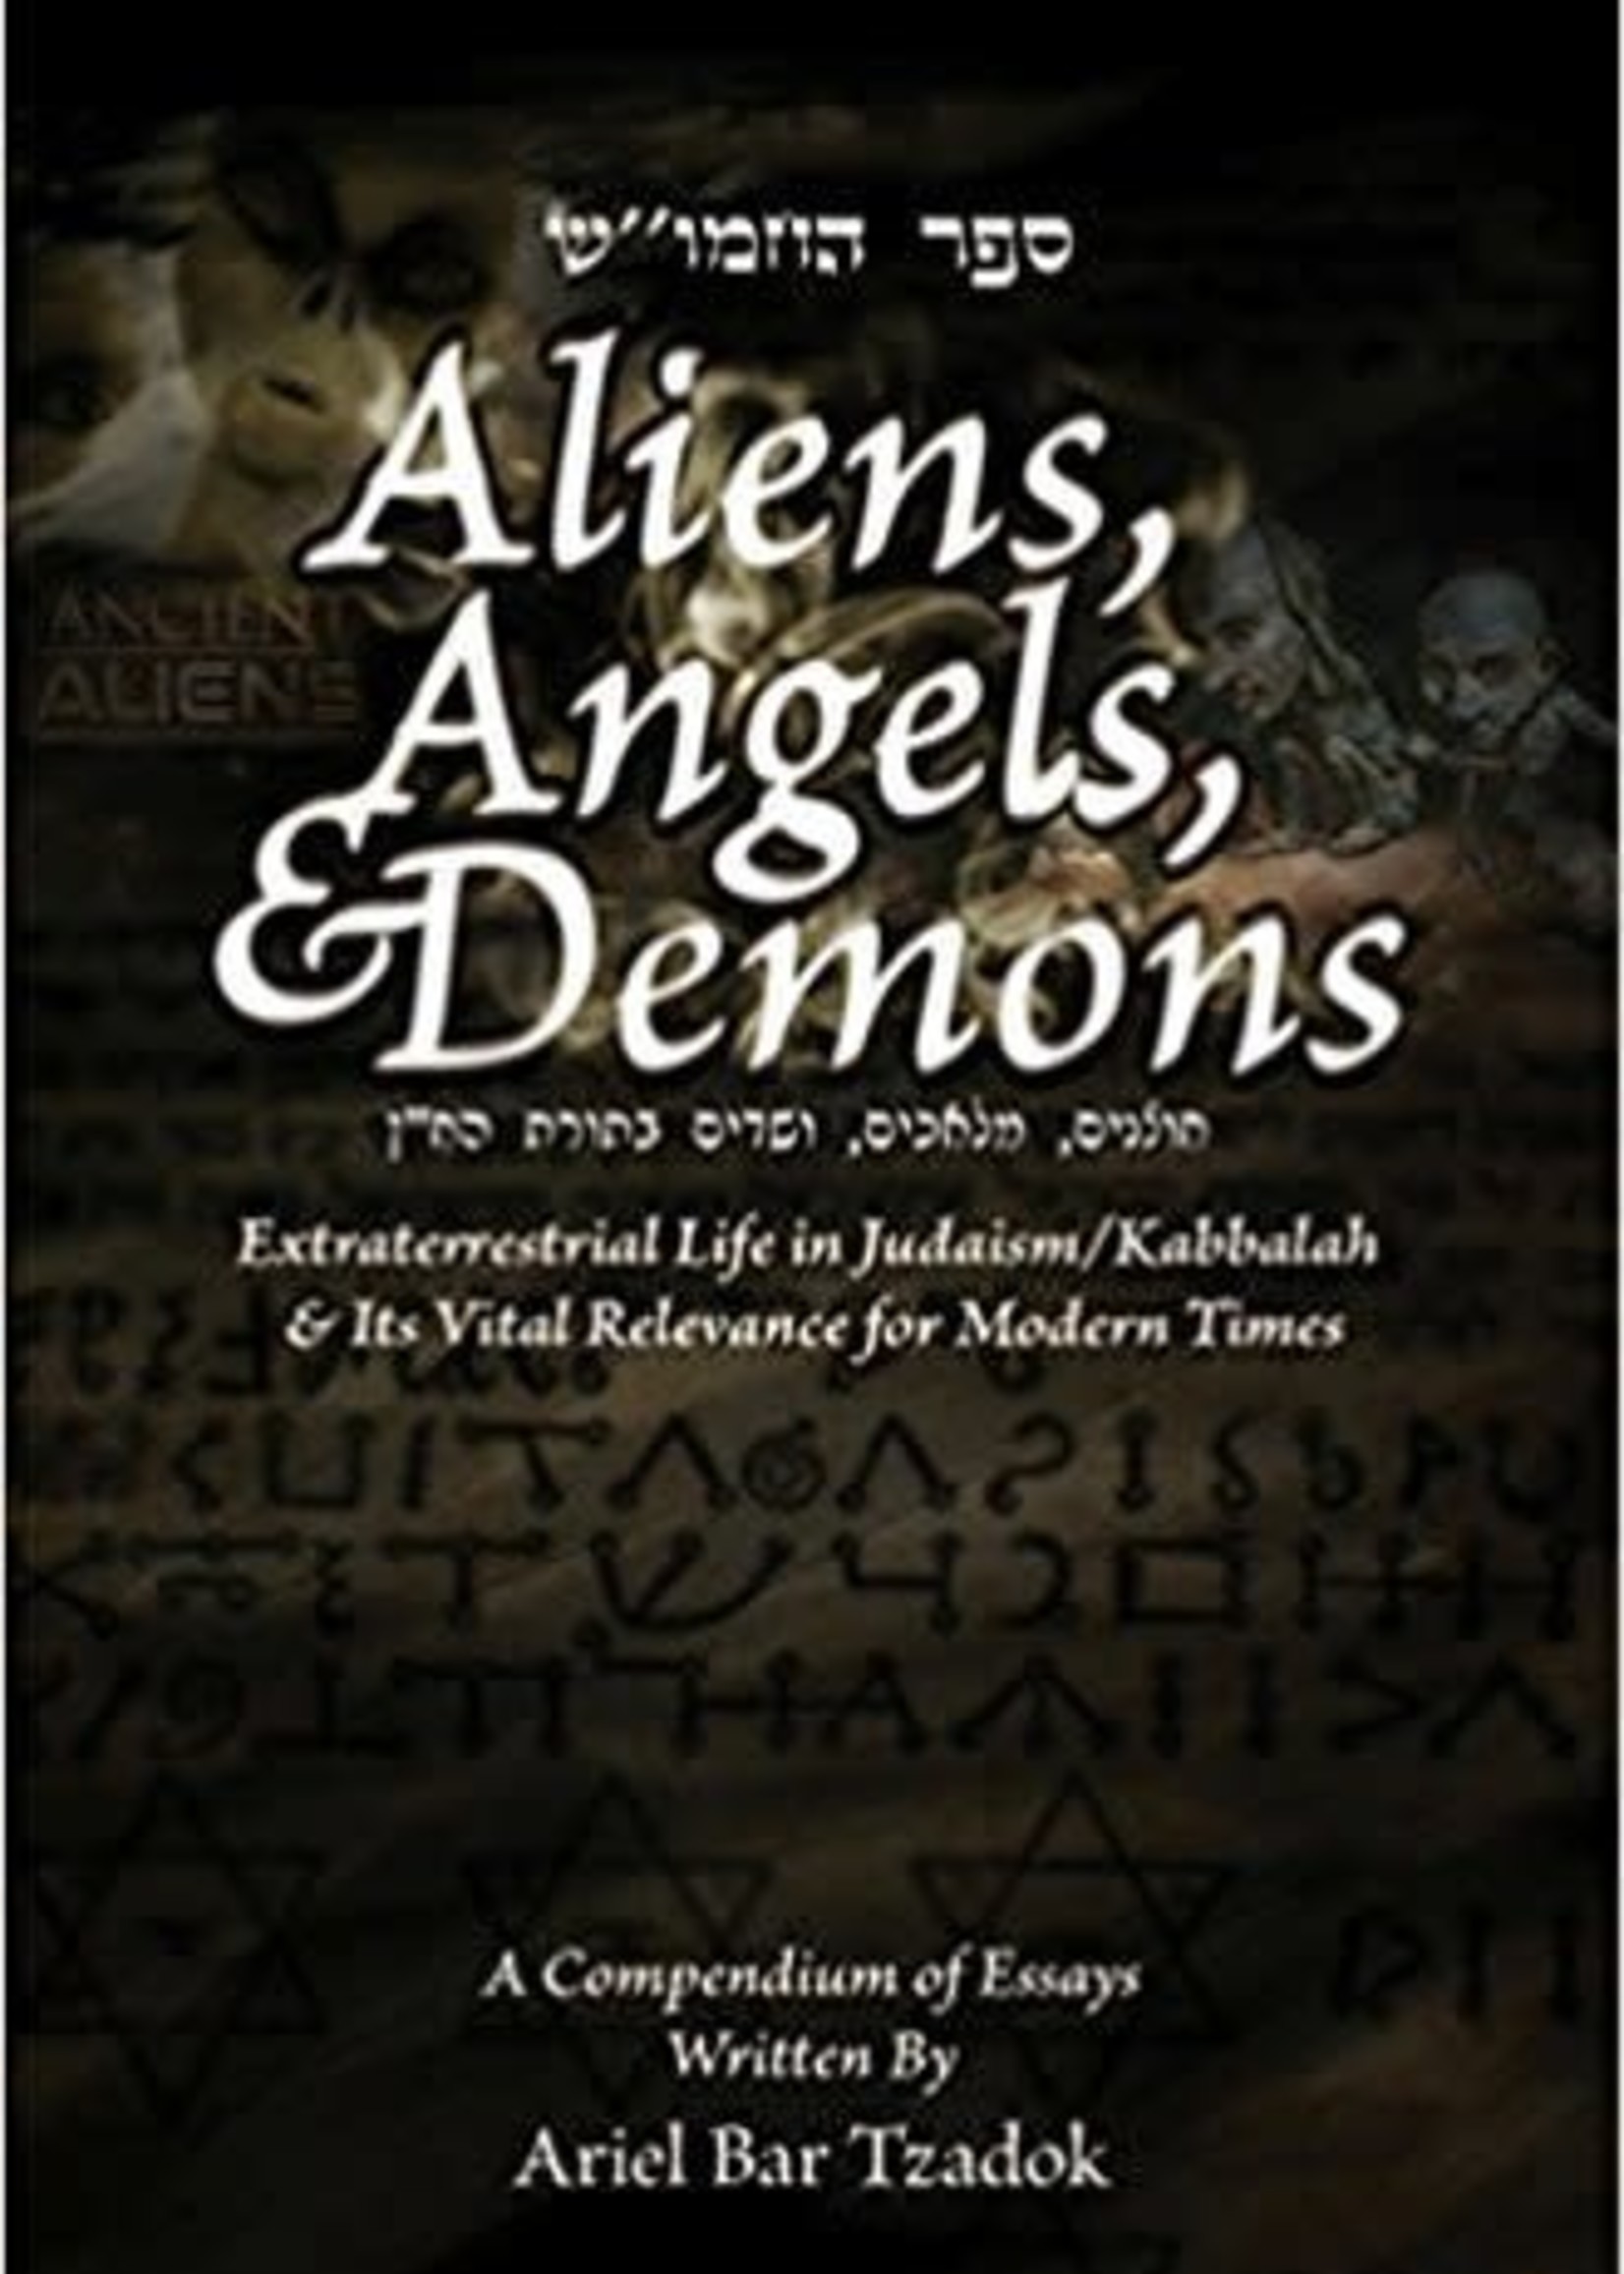 Ariel Bar Tzadok Aliens/ Angels and Demons: Extraterrestrial Life in Judaism/Kabbalah and its Relevance for Modern Times.